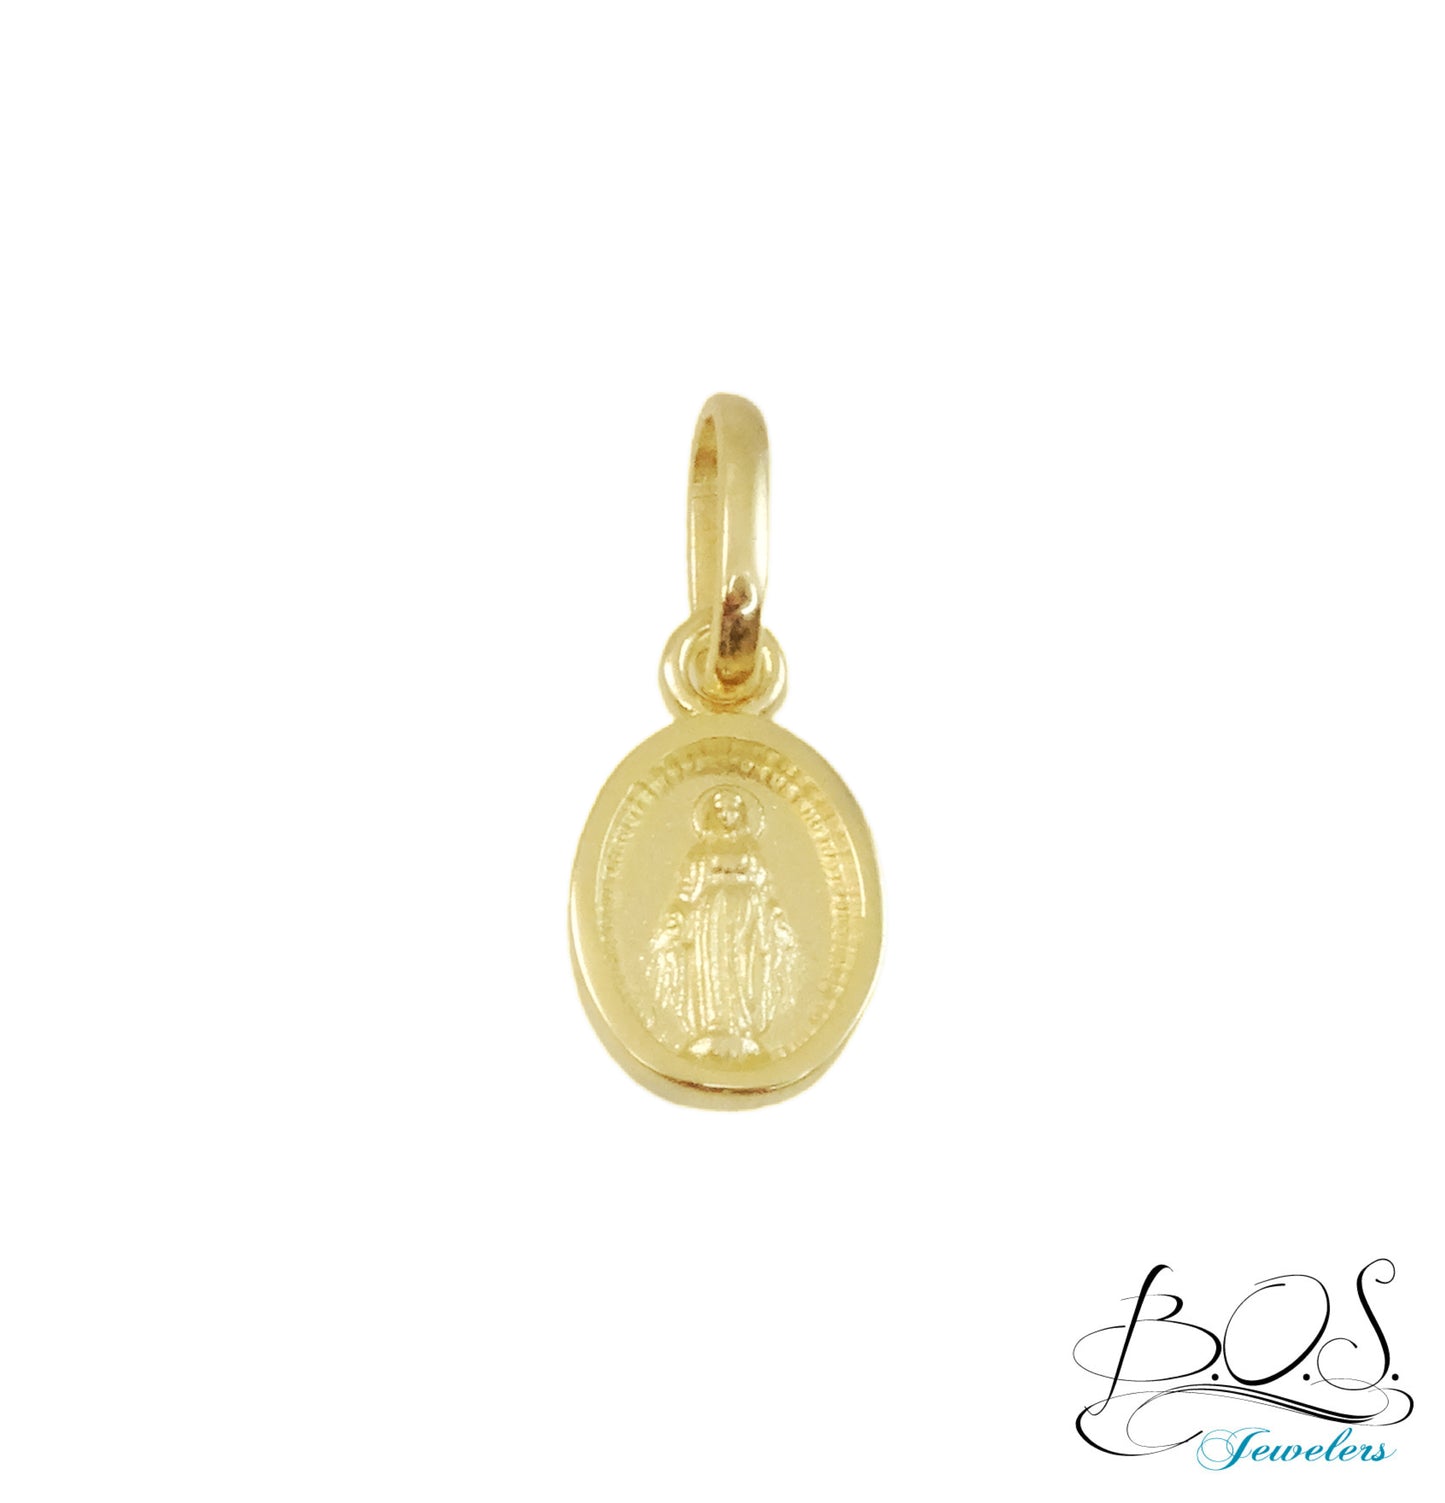 14K Gold Miniature Miraculous/Guadalupe Medal 7.5x6mm